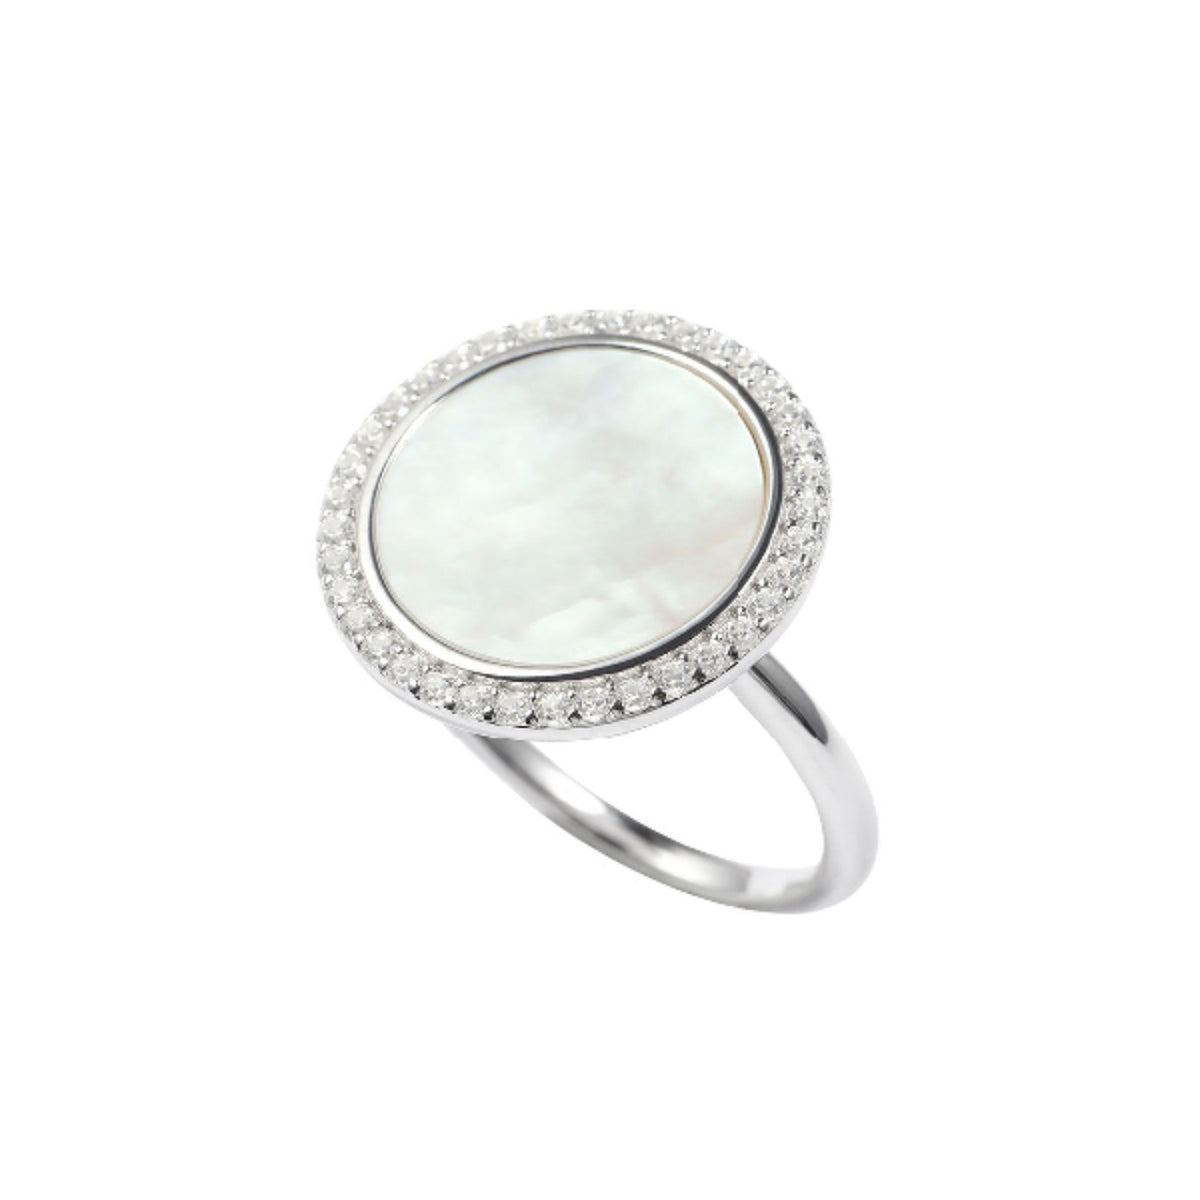 Fantasy Dream Mother-of-Pearl Ring